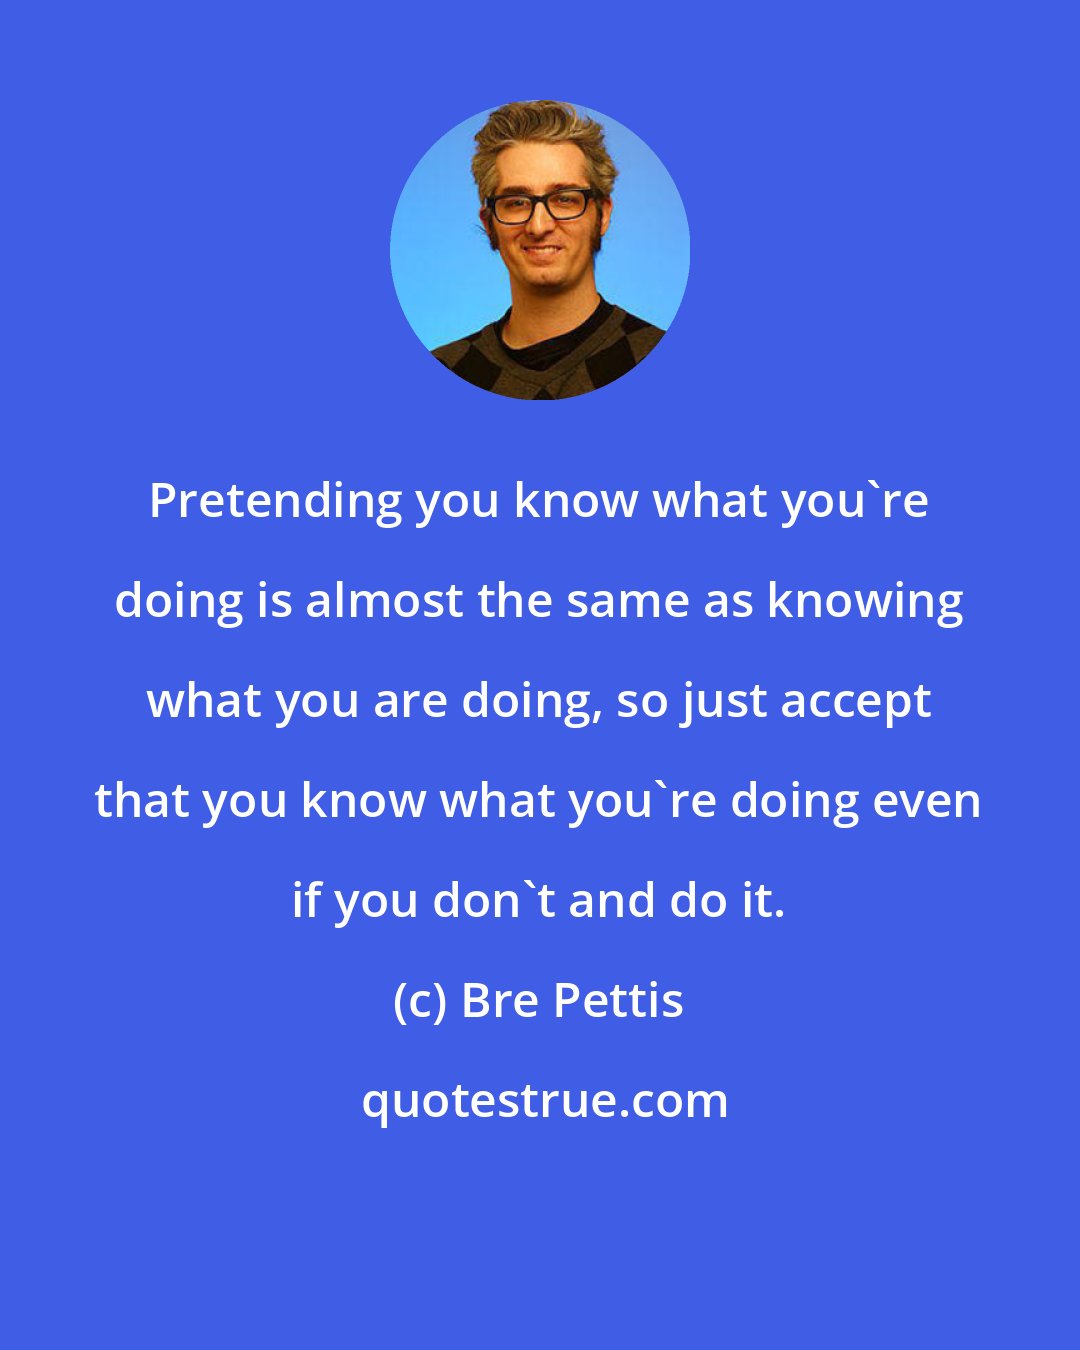 Bre Pettis: Pretending you know what you're doing is almost the same as knowing what you are doing, so just accept that you know what you're doing even if you don't and do it.